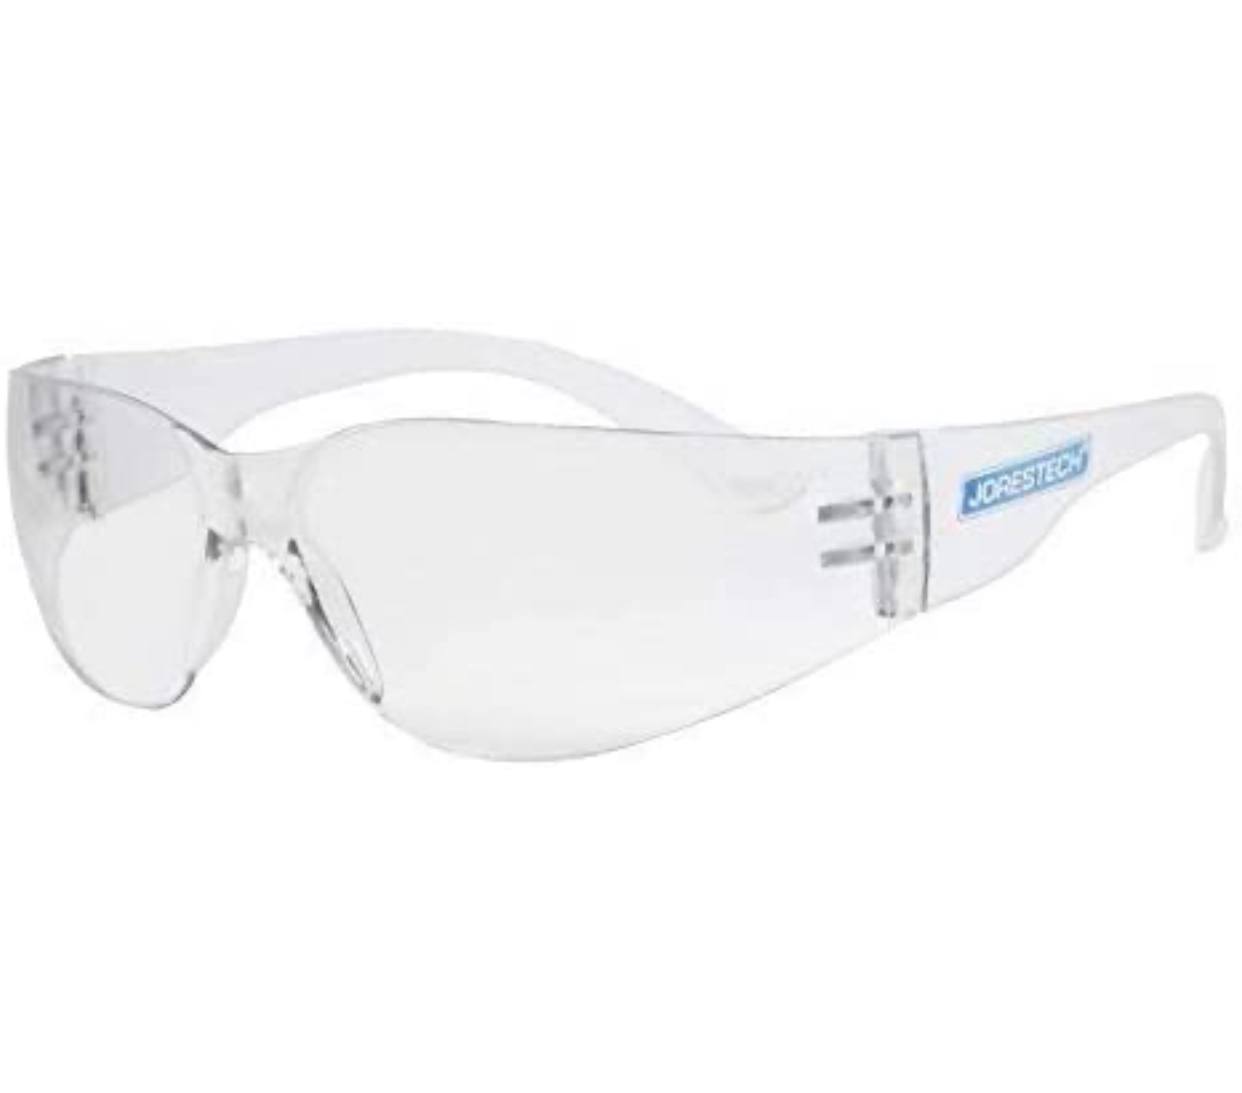 JORESTECH Eyewear Protective Safety Glasses, Polycarbonate Impact Resistant Lens  (Clear)